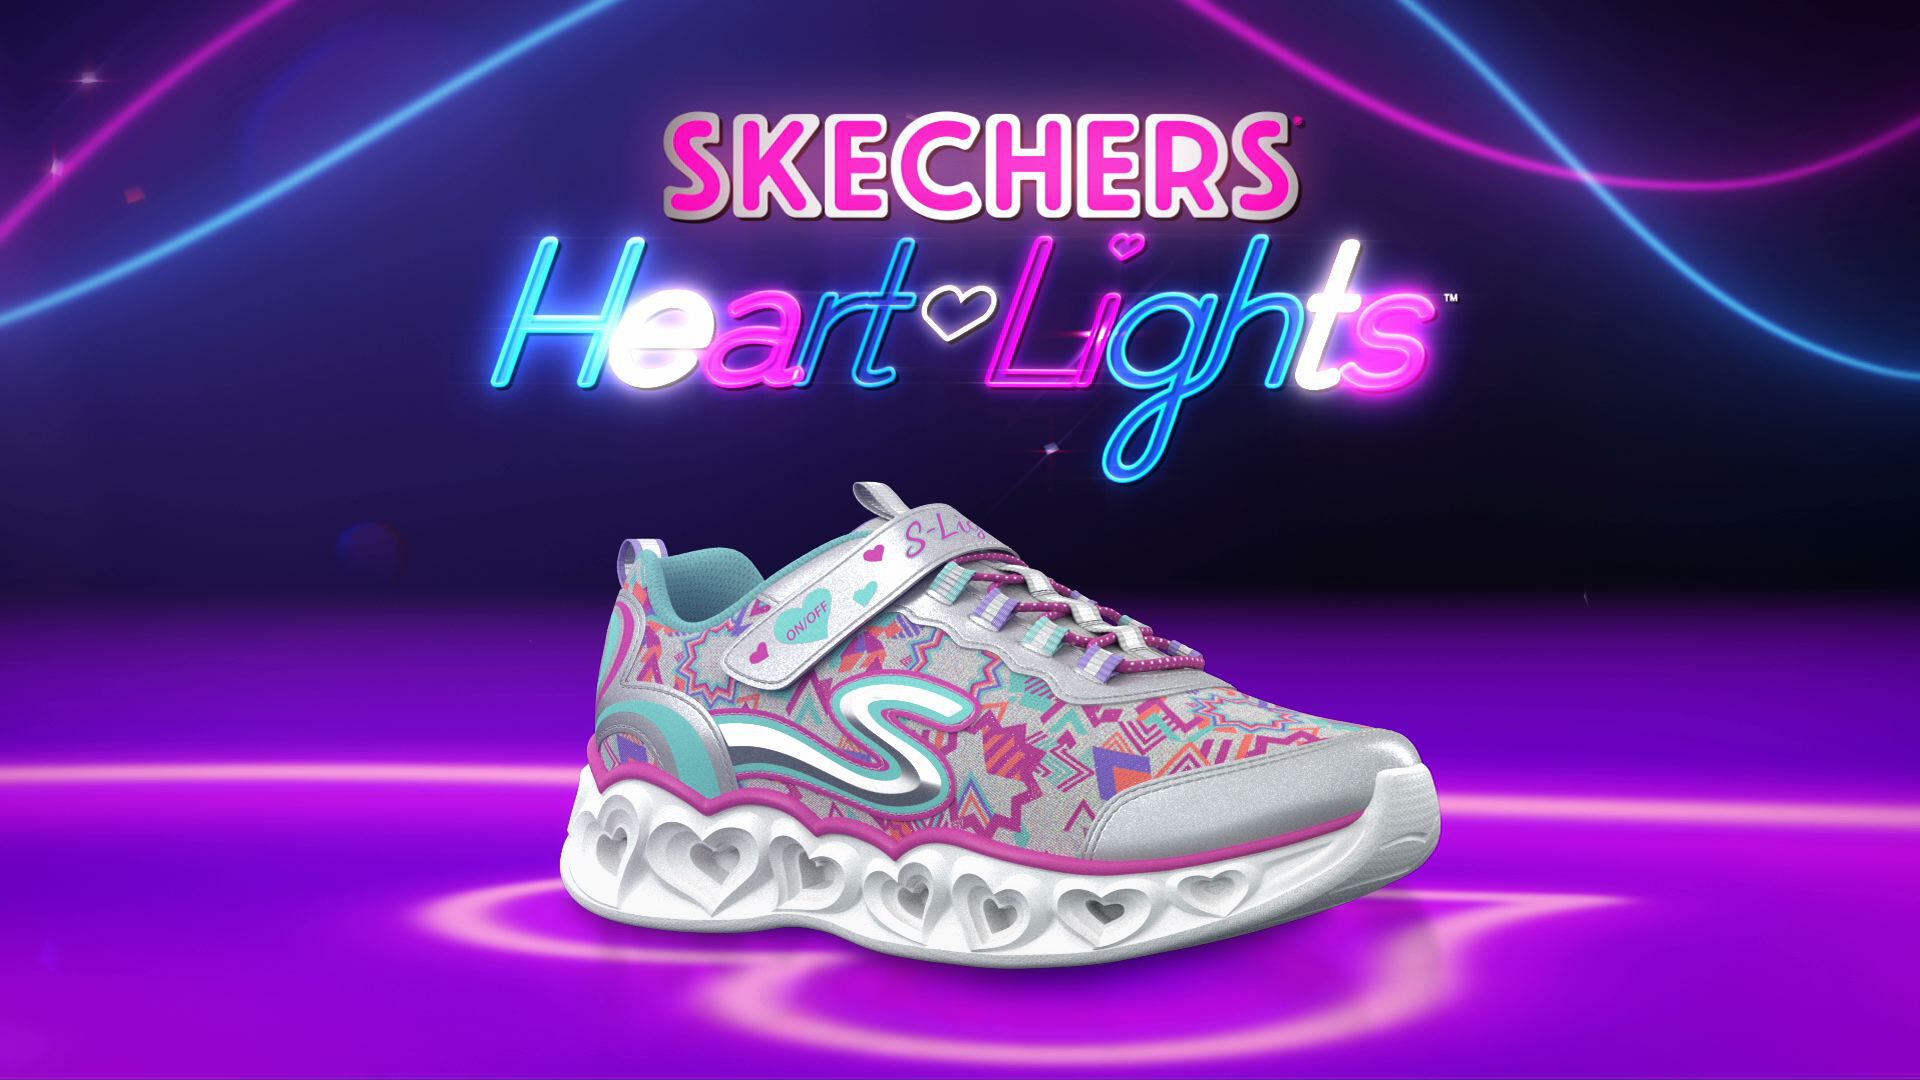 skechers shoes commercial 2016